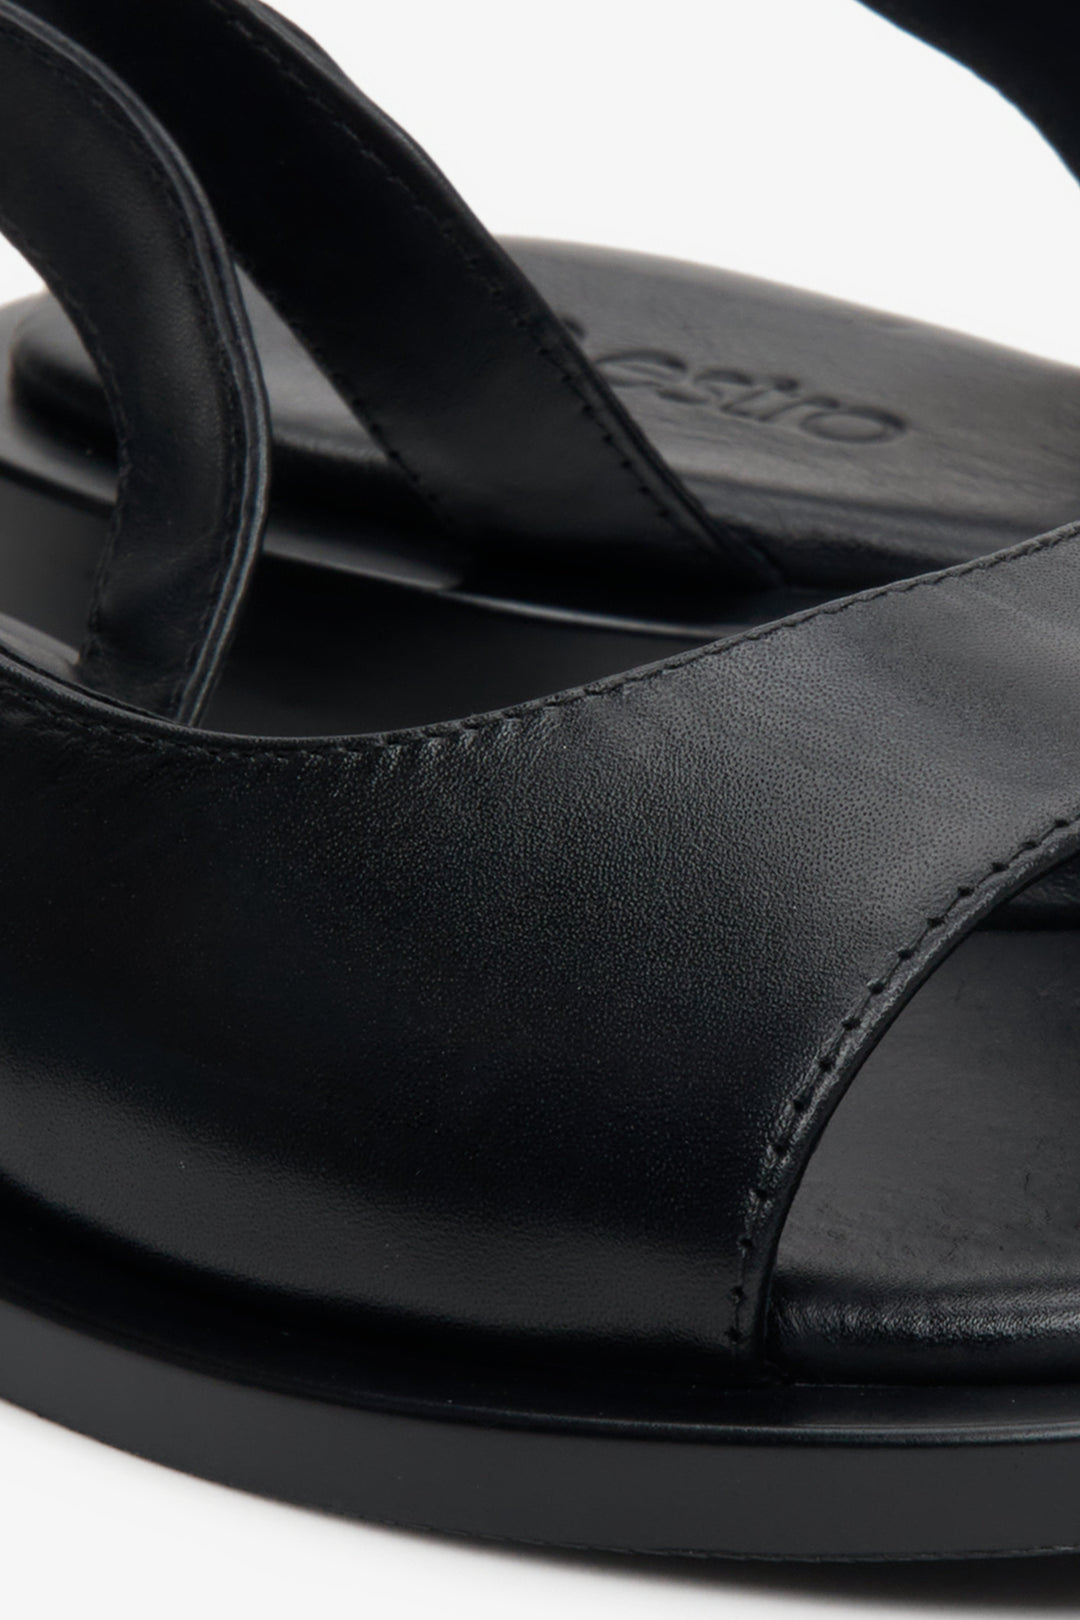 Women's sandals in black made of natural leather Estro - close-up of the stitching system.